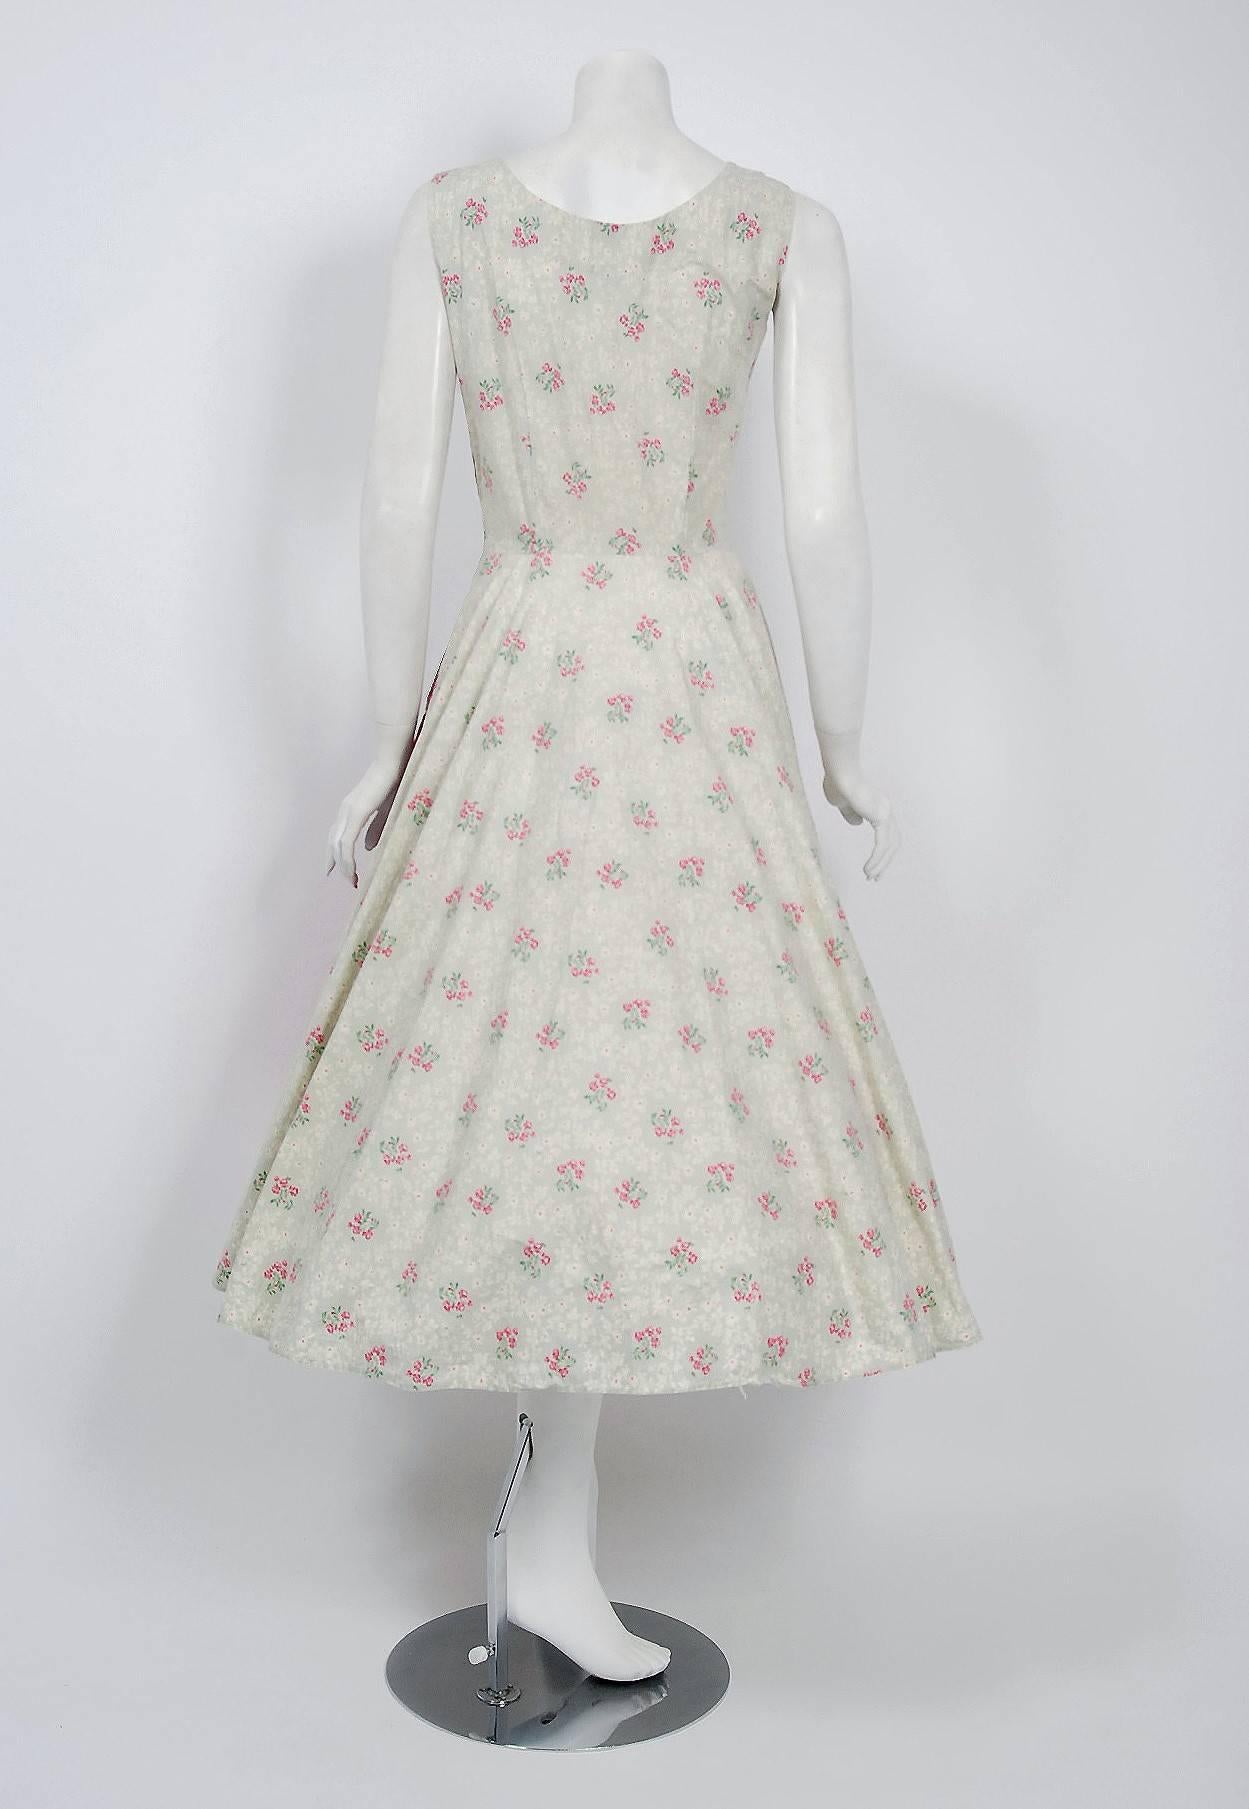 Beige 1950's Embroidered Pink-Floral Print Quilted Rhinestone Cotton Full-Skirt Dress